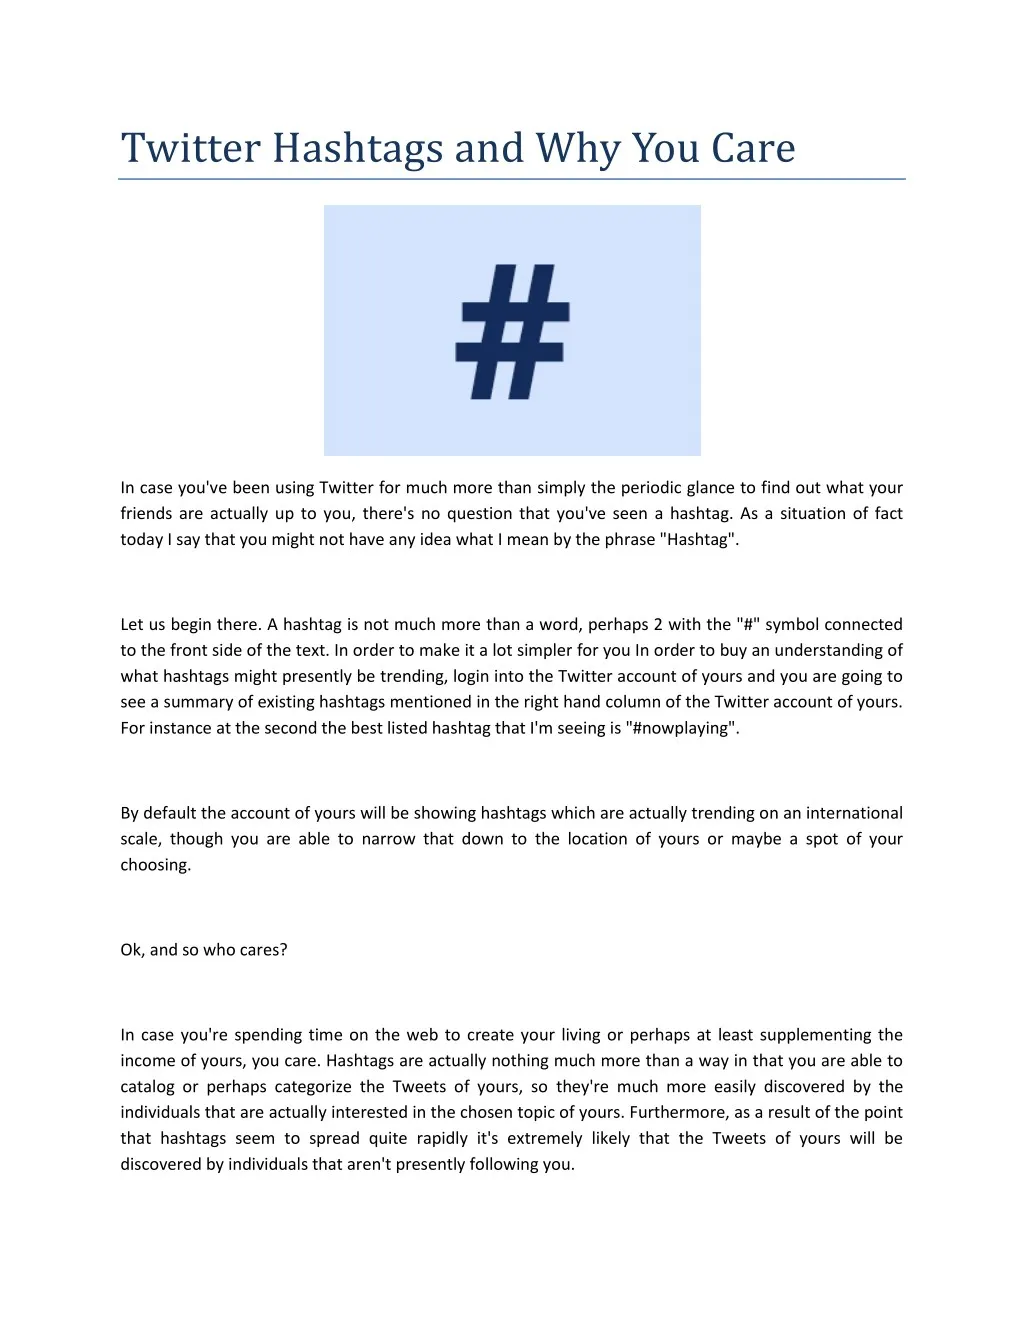 twitter hashtags and why you care